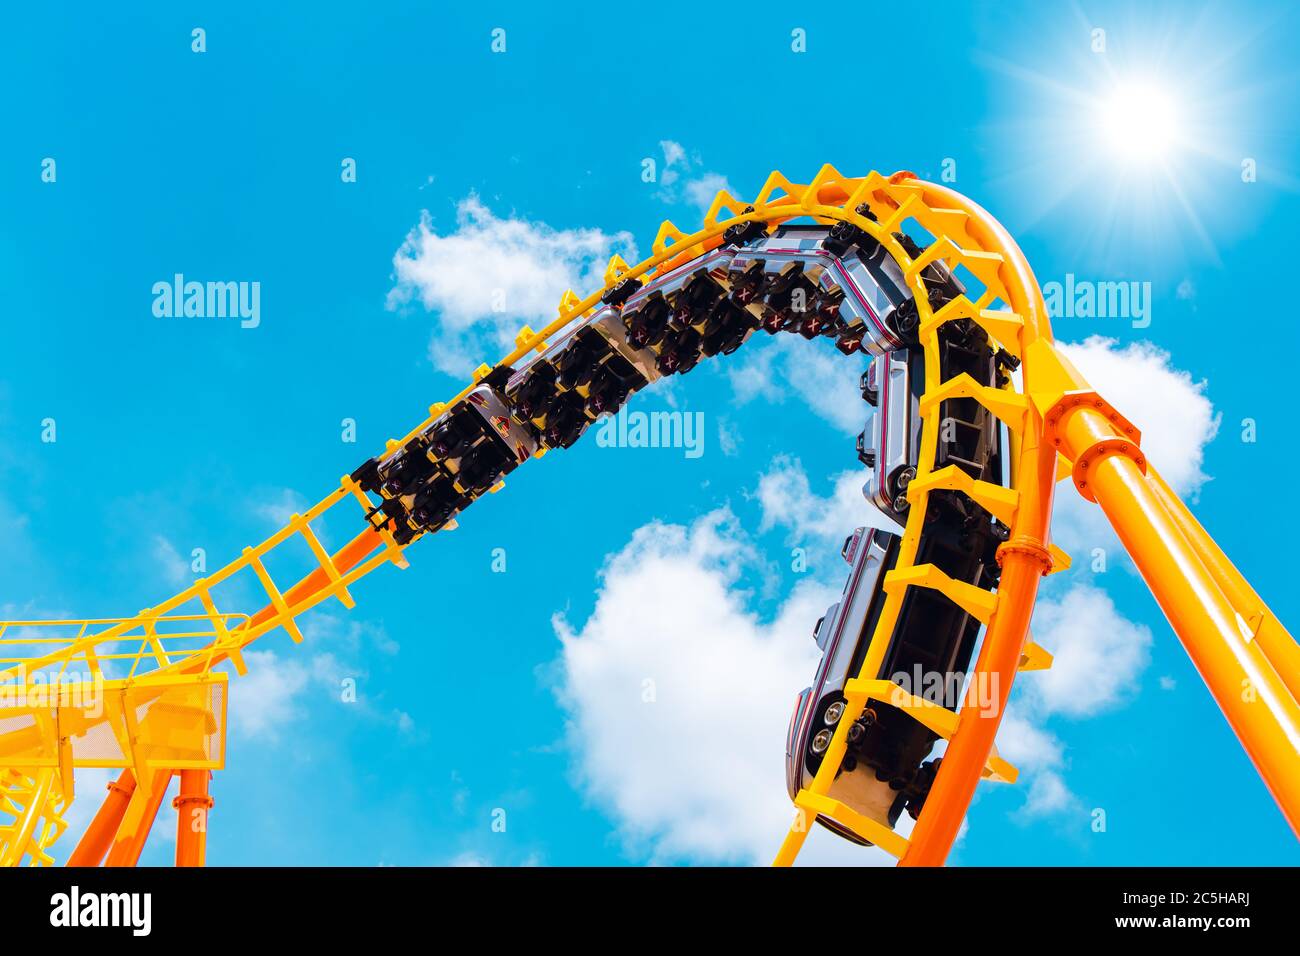 Rollercoaster railroad car no people testing track high to the sky roll bend and twist for exciting fun people at theme park during Coronavirus(Covid- Stock Photo